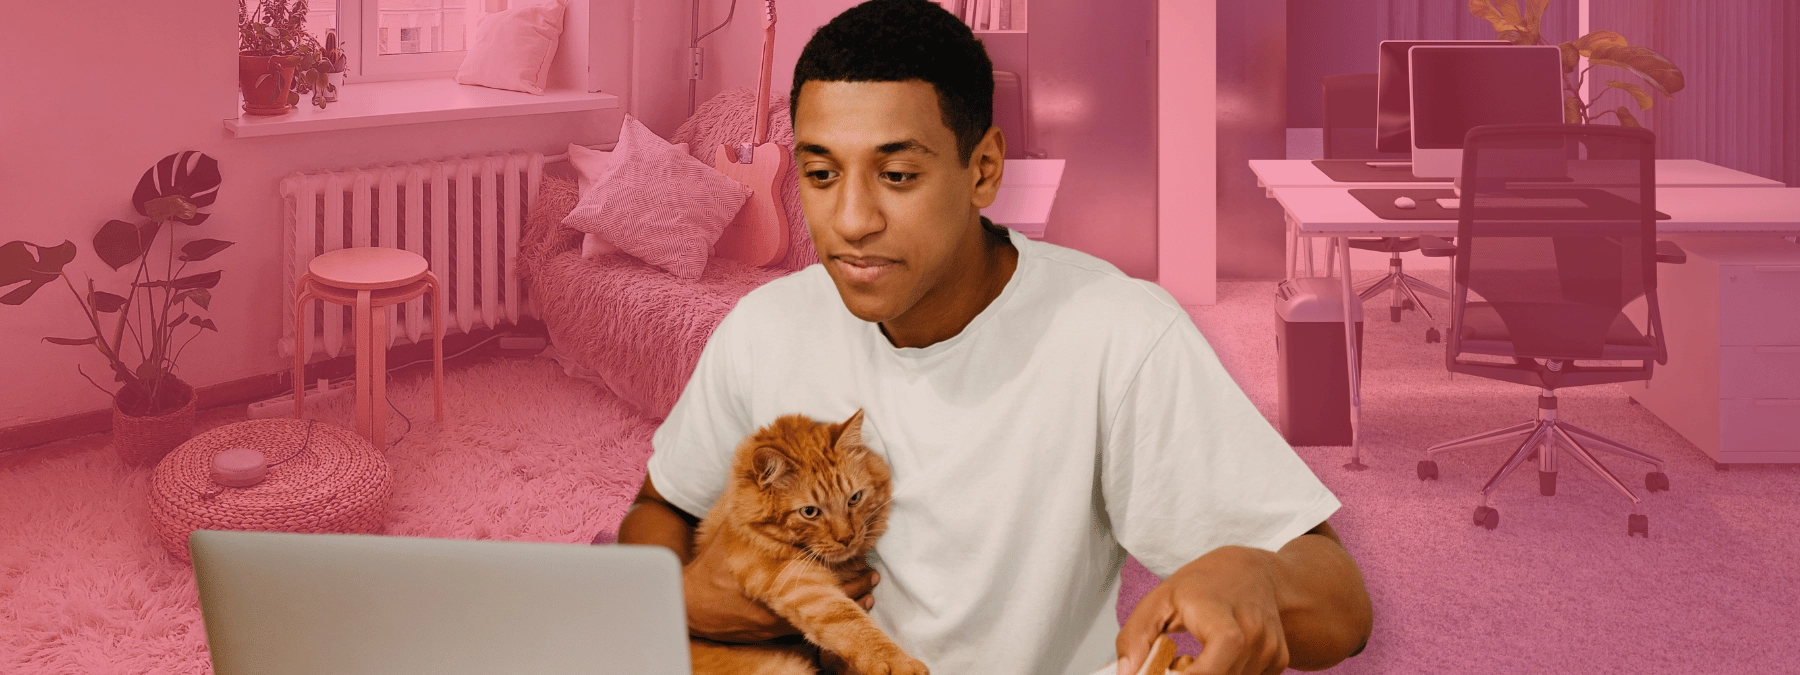 Man with cat with home and office backgrounds